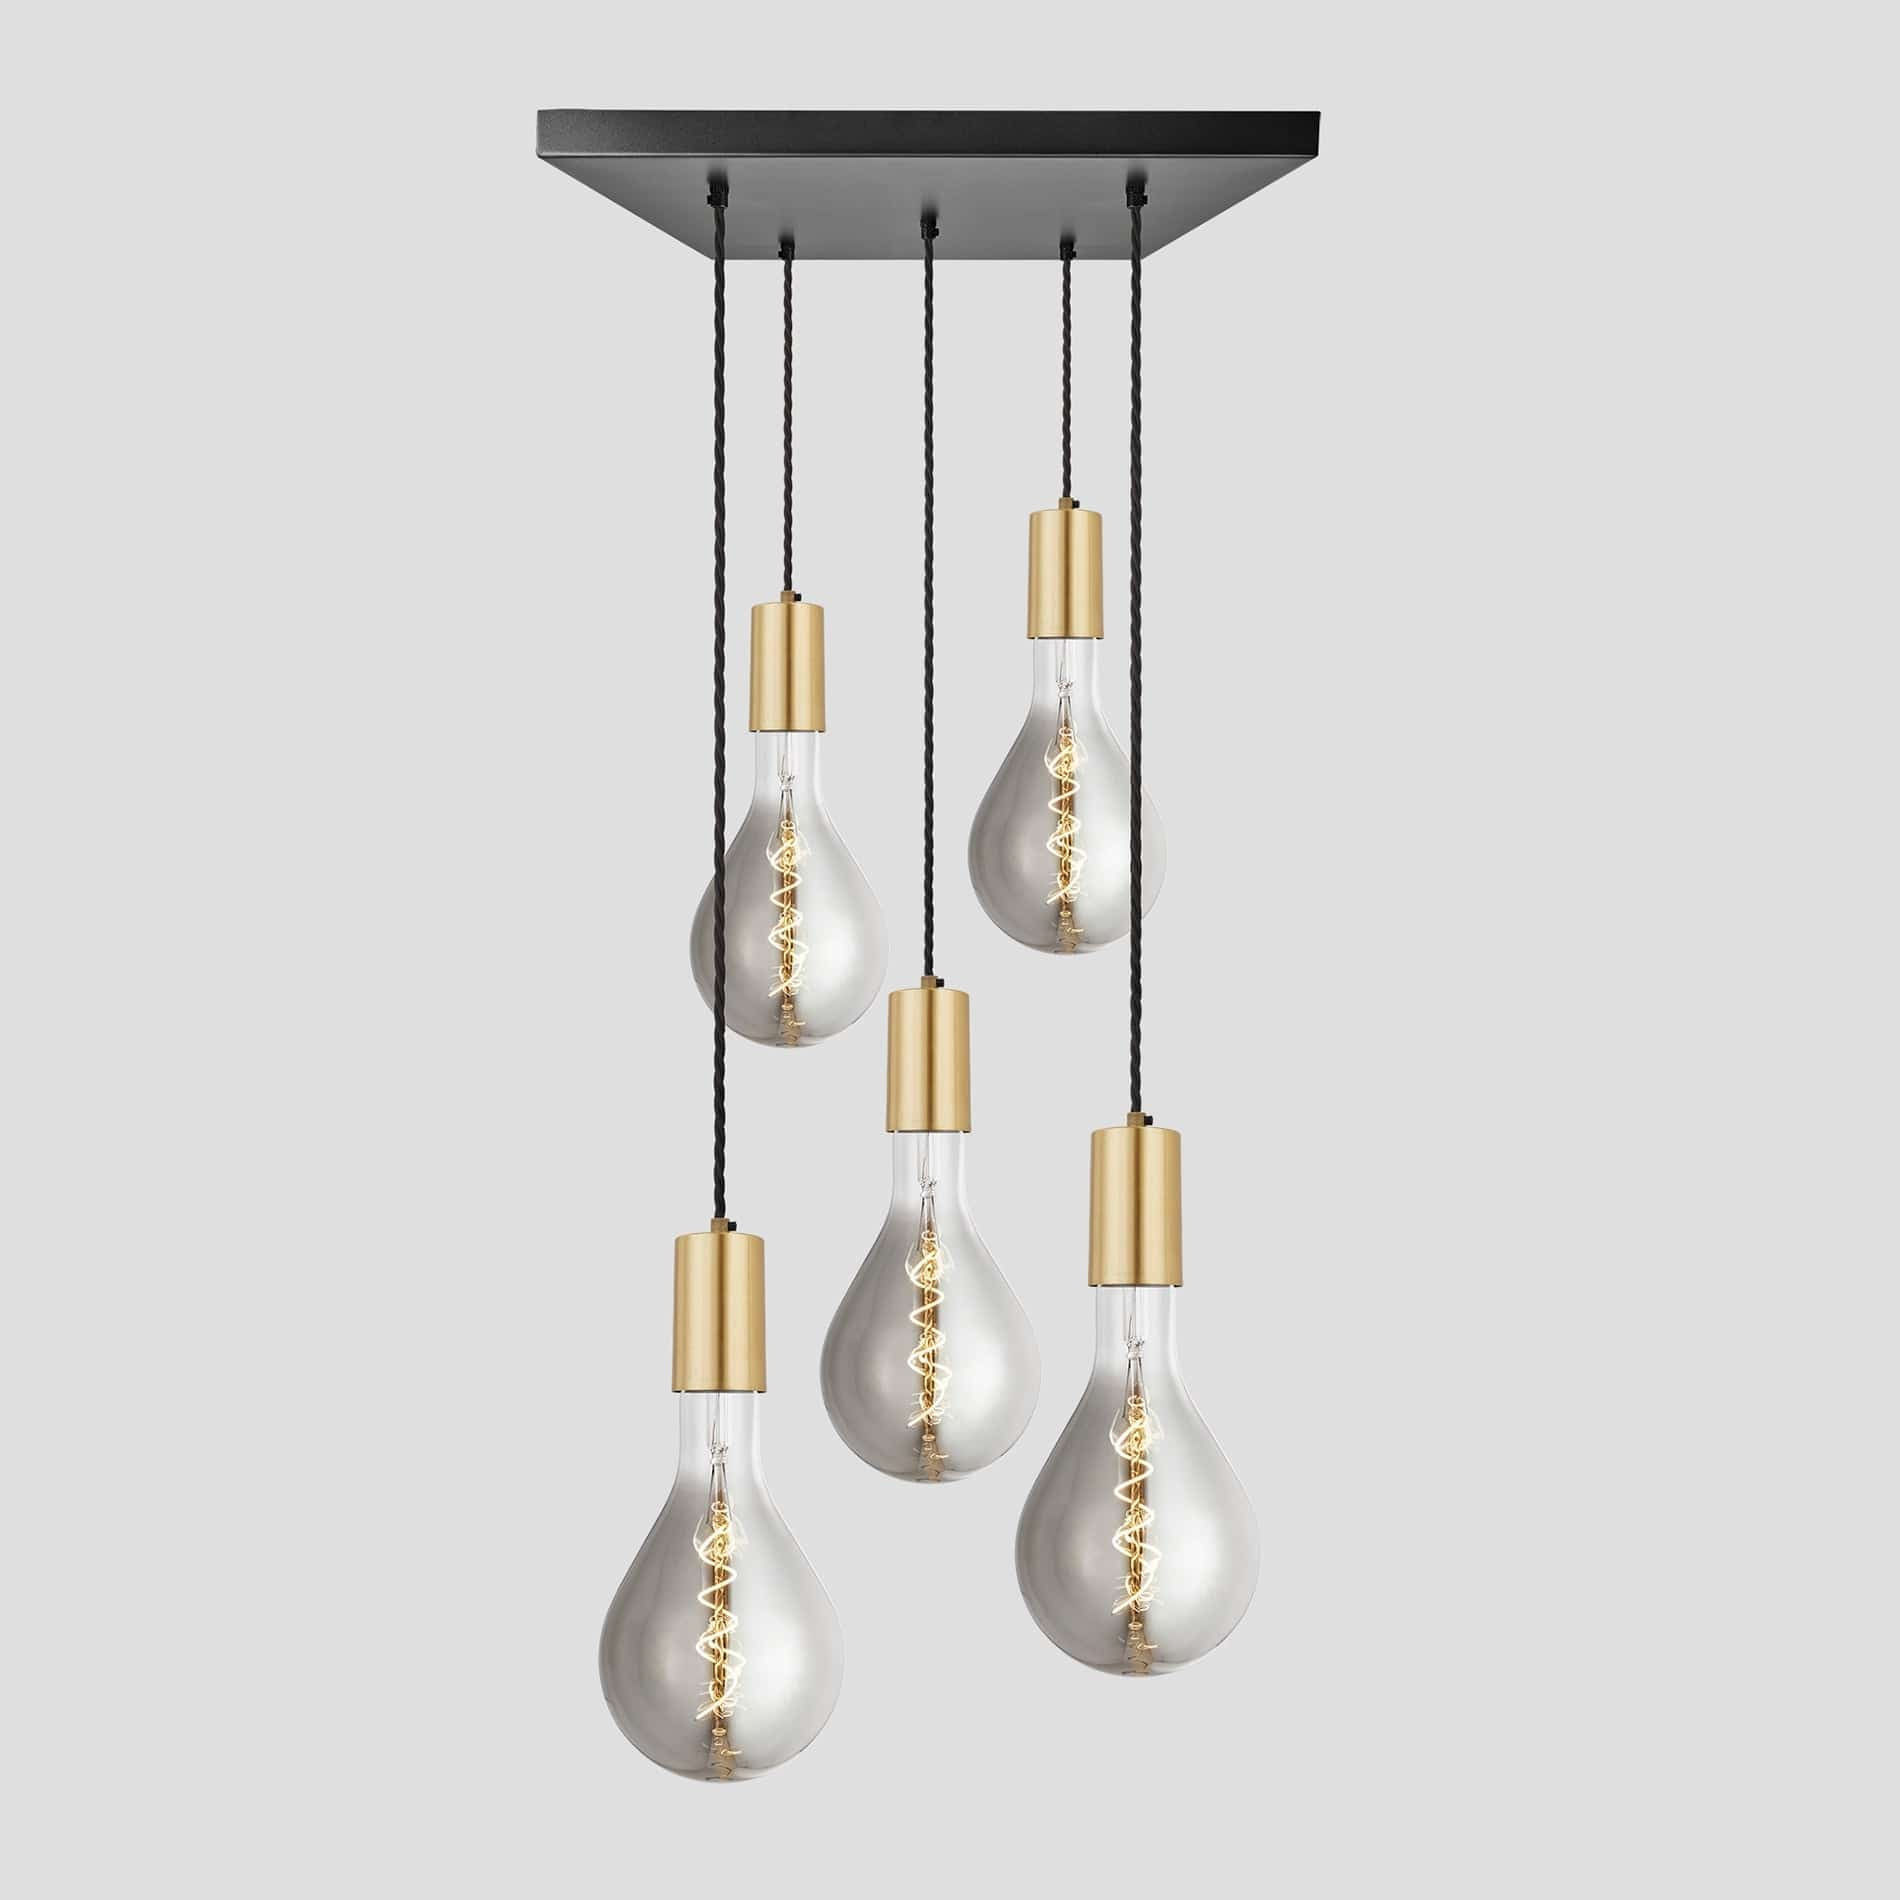 Sleek Large Edison Square Cluster Lights - 5 Wire – Brass